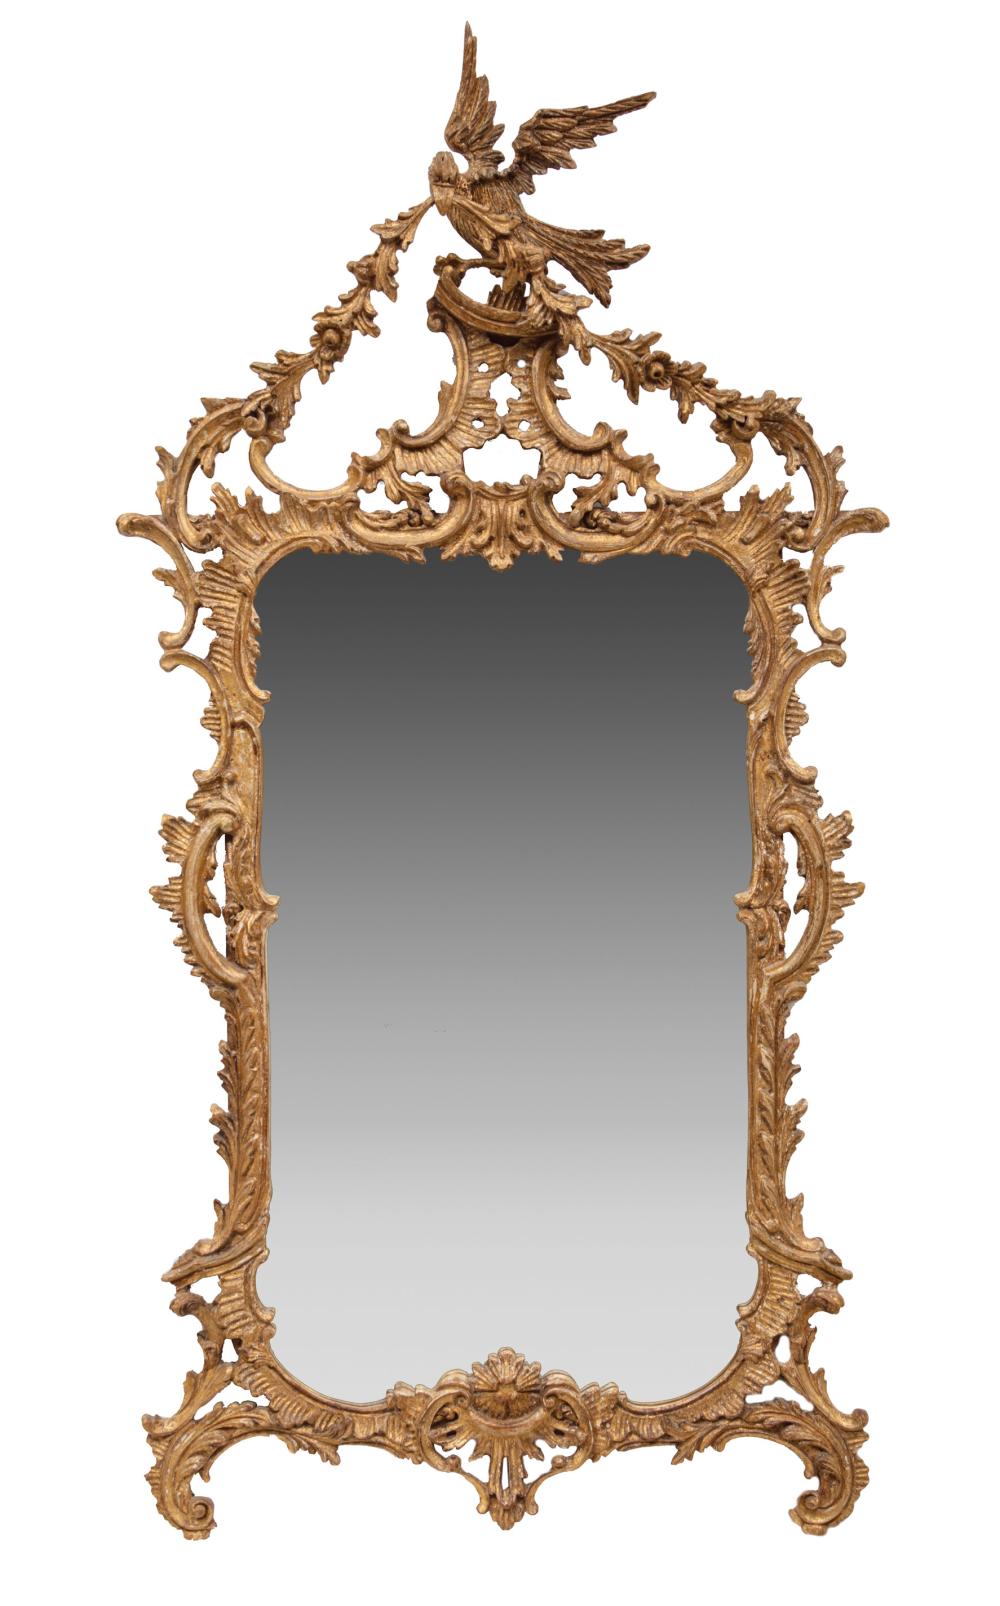 CHIPPENDALE-STYLE GILTWOOD MIRRORChippendale-Style